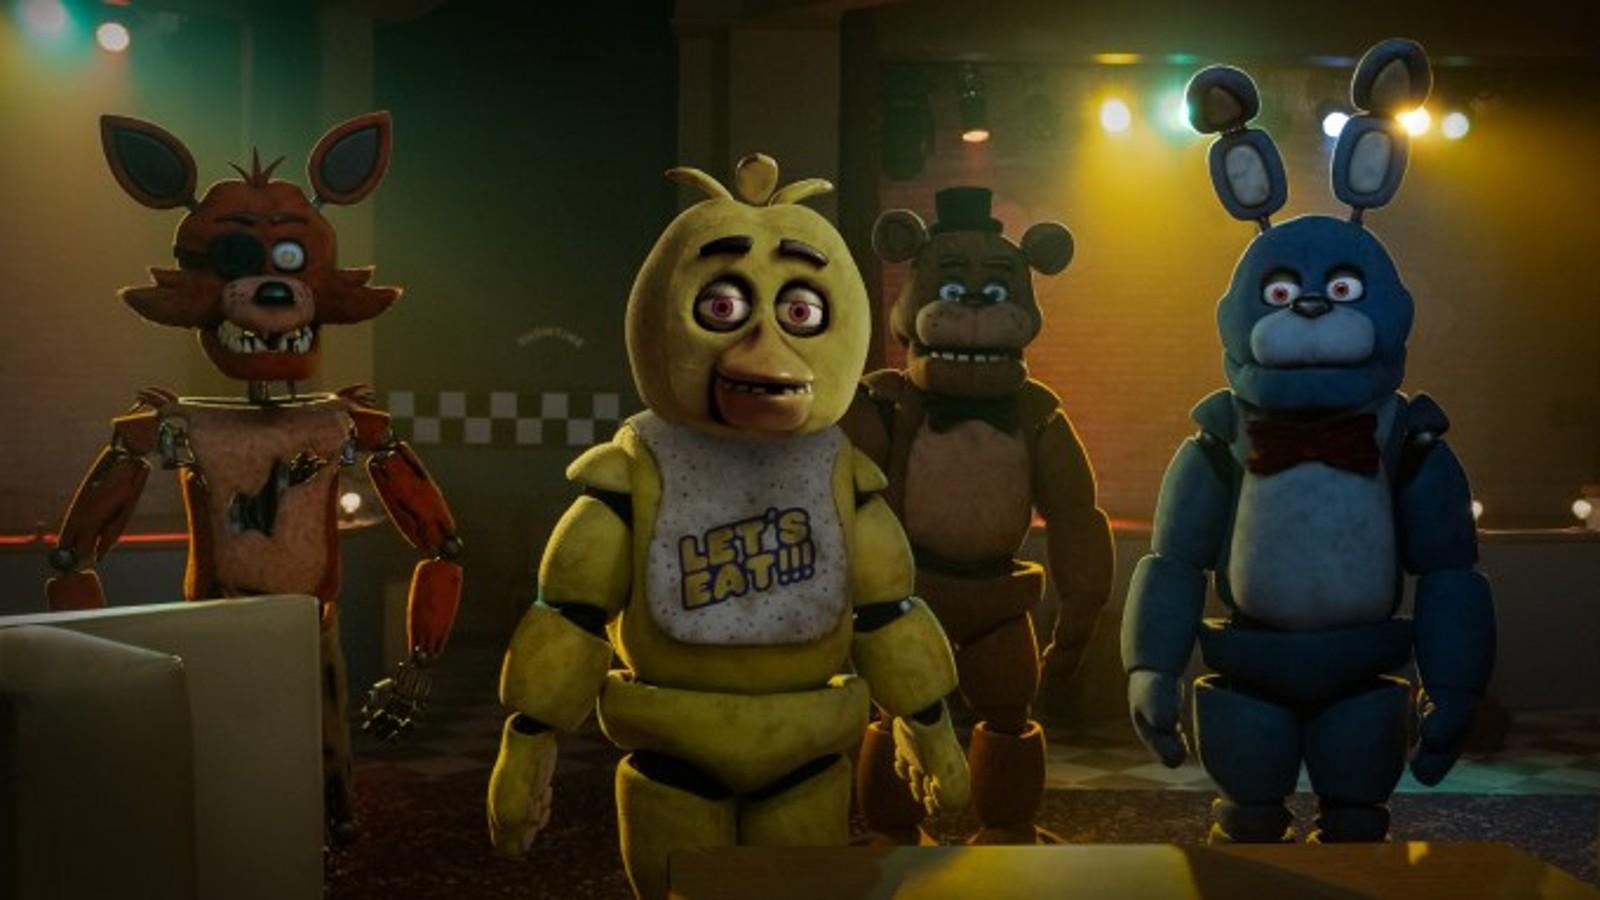 The baddies in Five Nights at Freddy's.